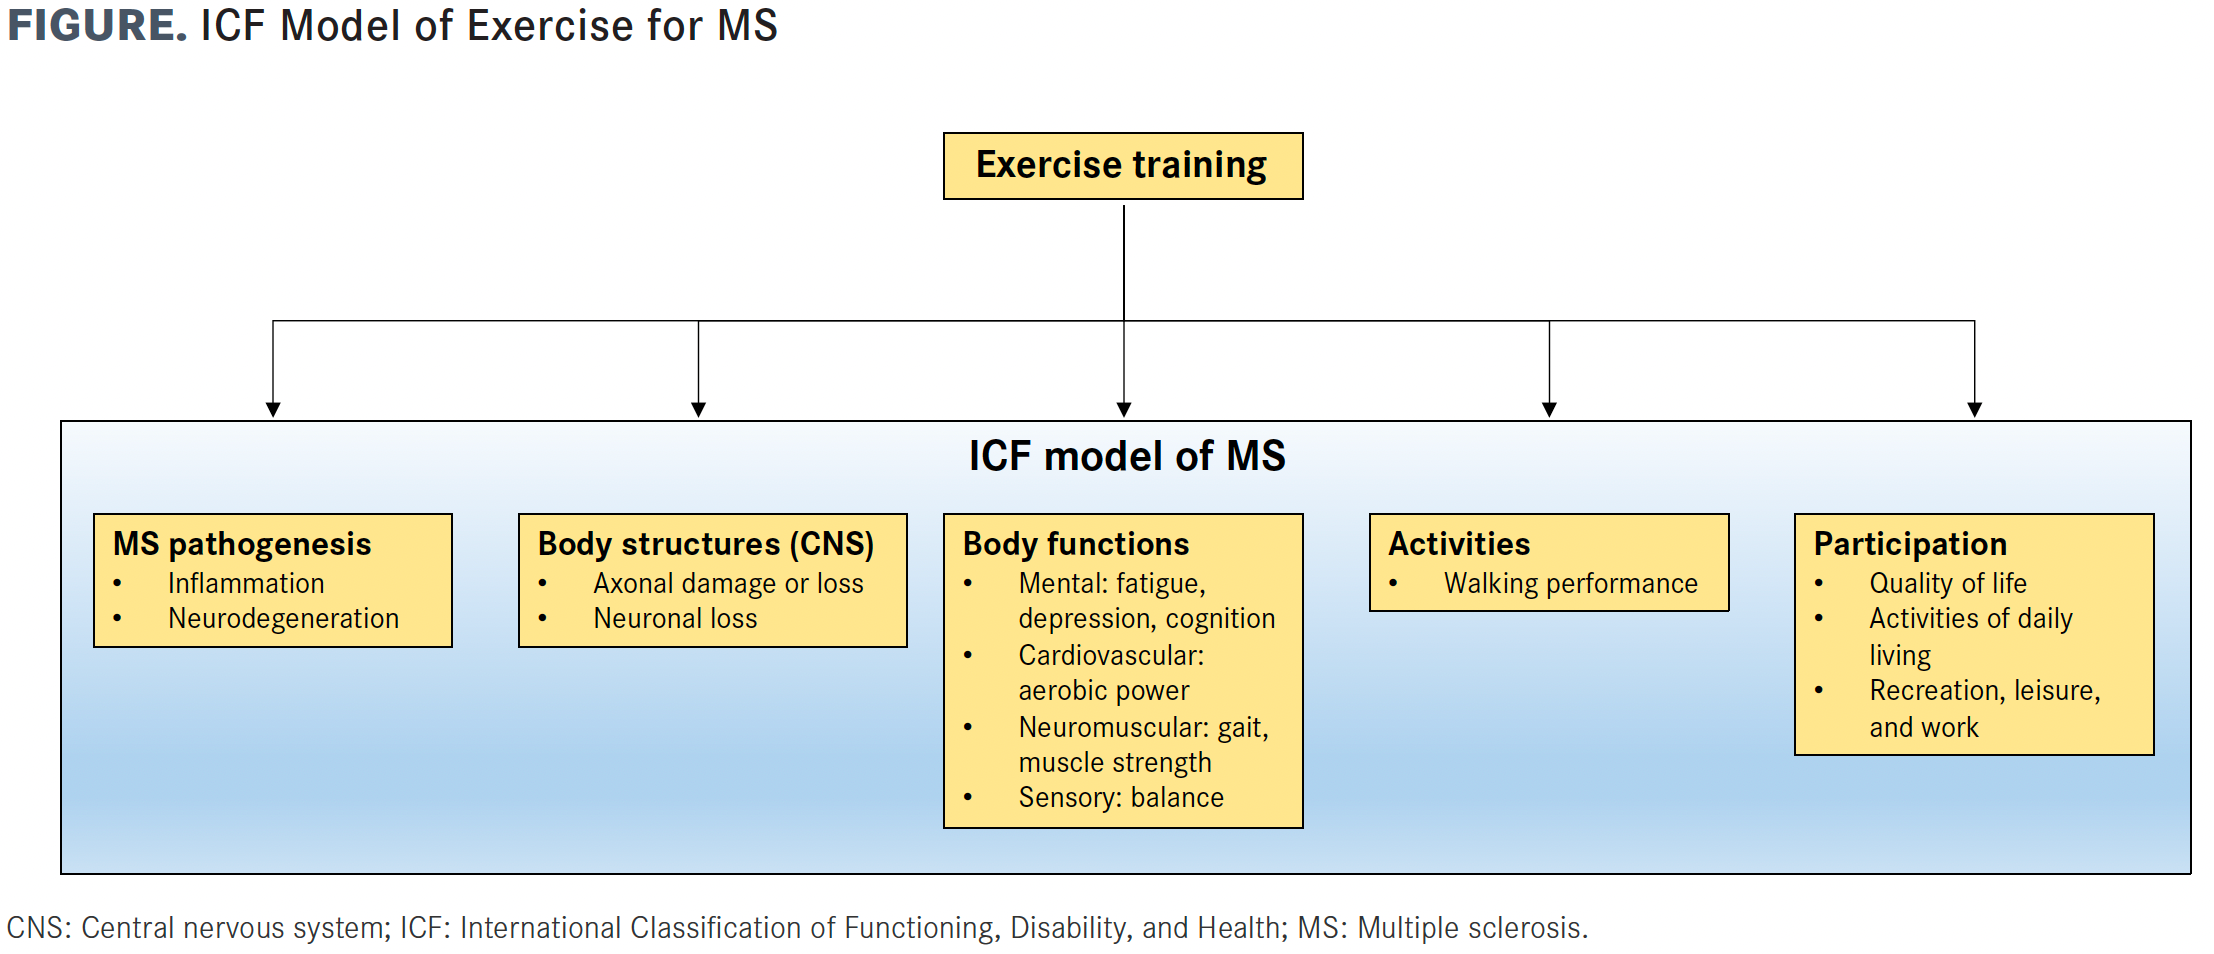 FIGURE. ICF Model of Exercise for MS (Click to enlarge)